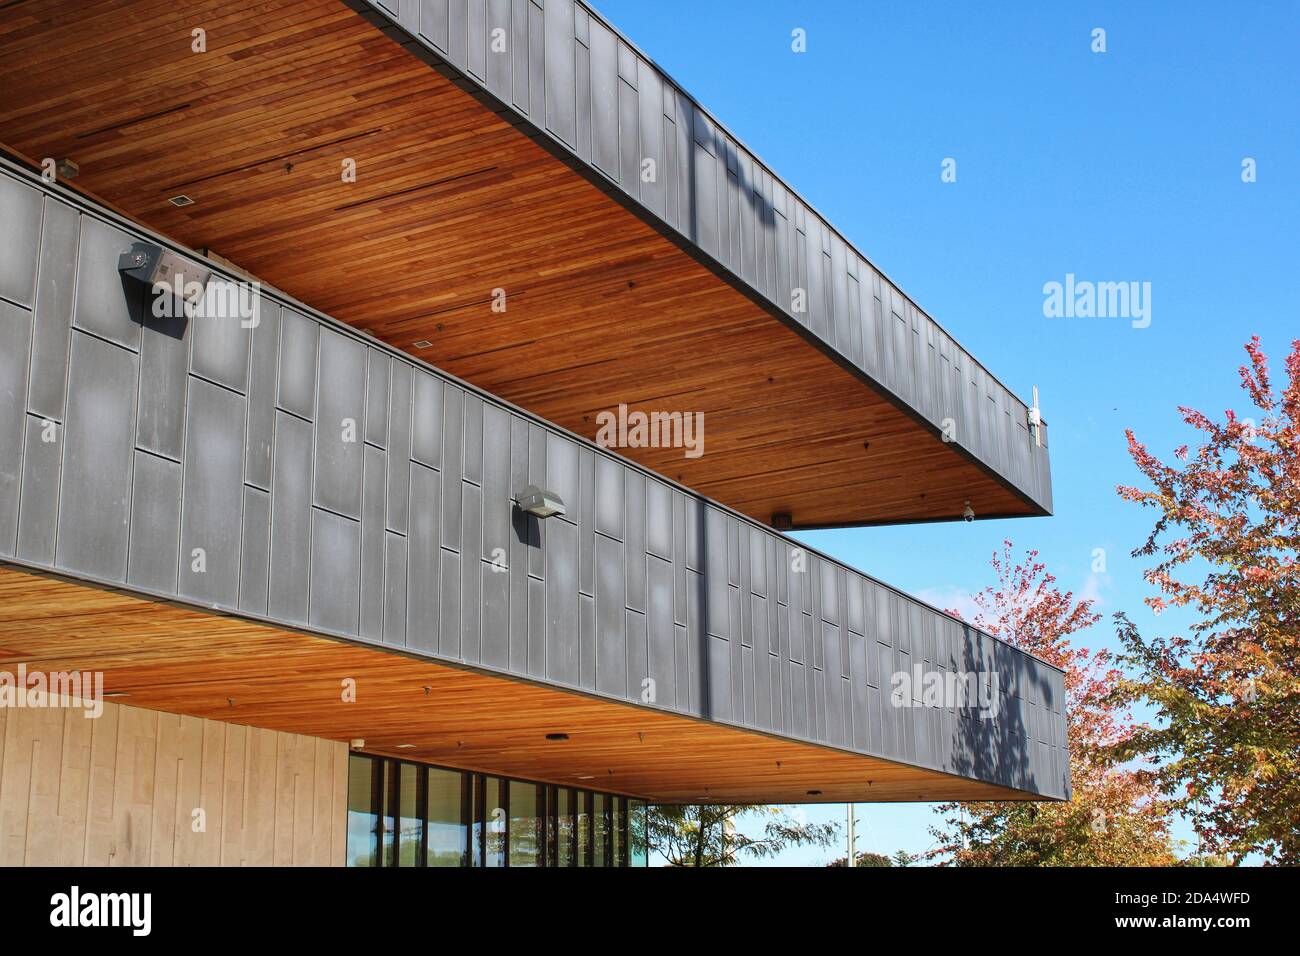 Big school building with brown and black architecture Stock Photo